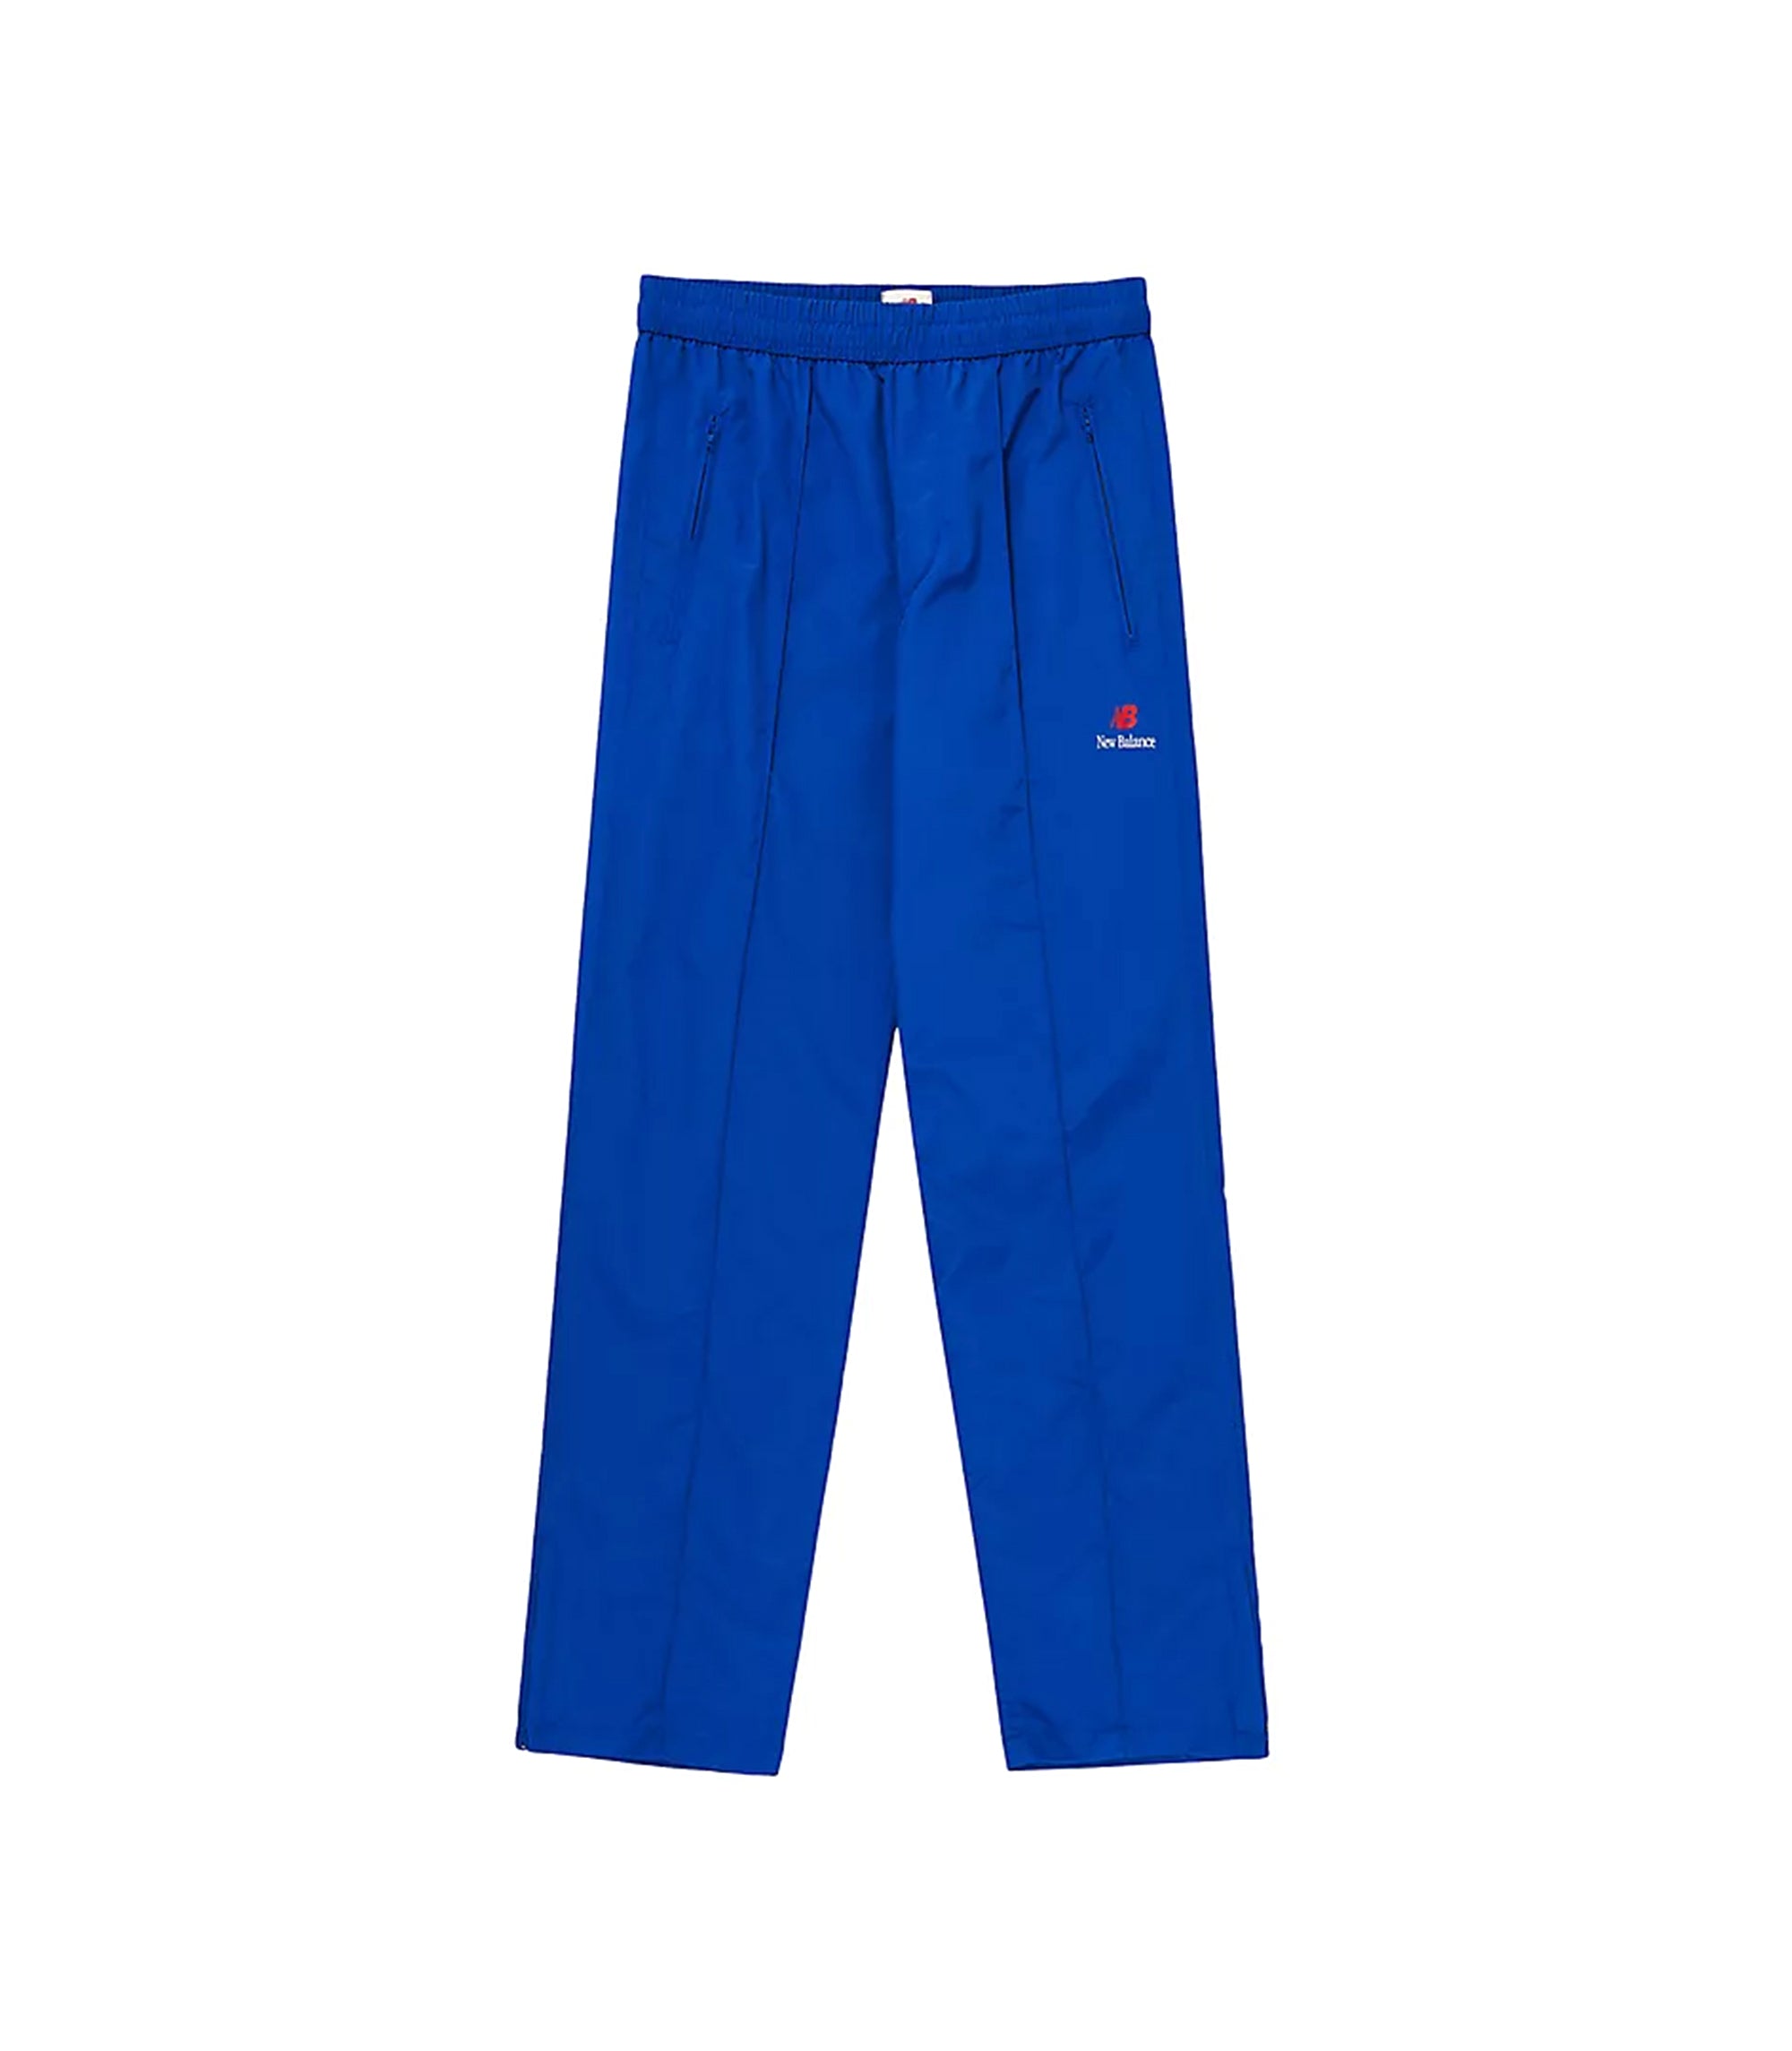 Made in USA Woven Pants - Team Royal